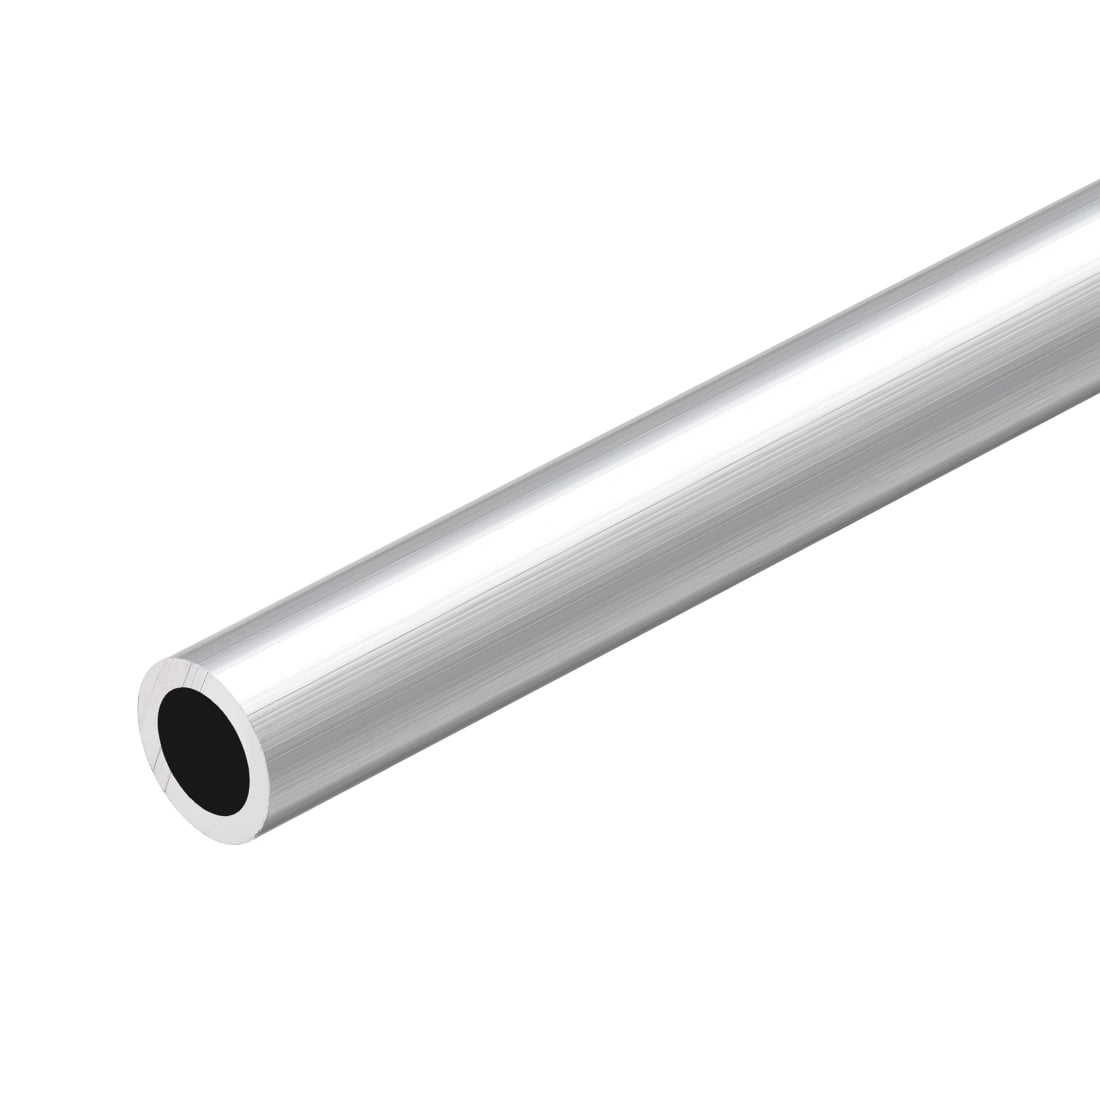 Details about   6063 Aluminum Round Tube 300mm Length 16mm OD 11mm Inner Dia Seamless Tubing 